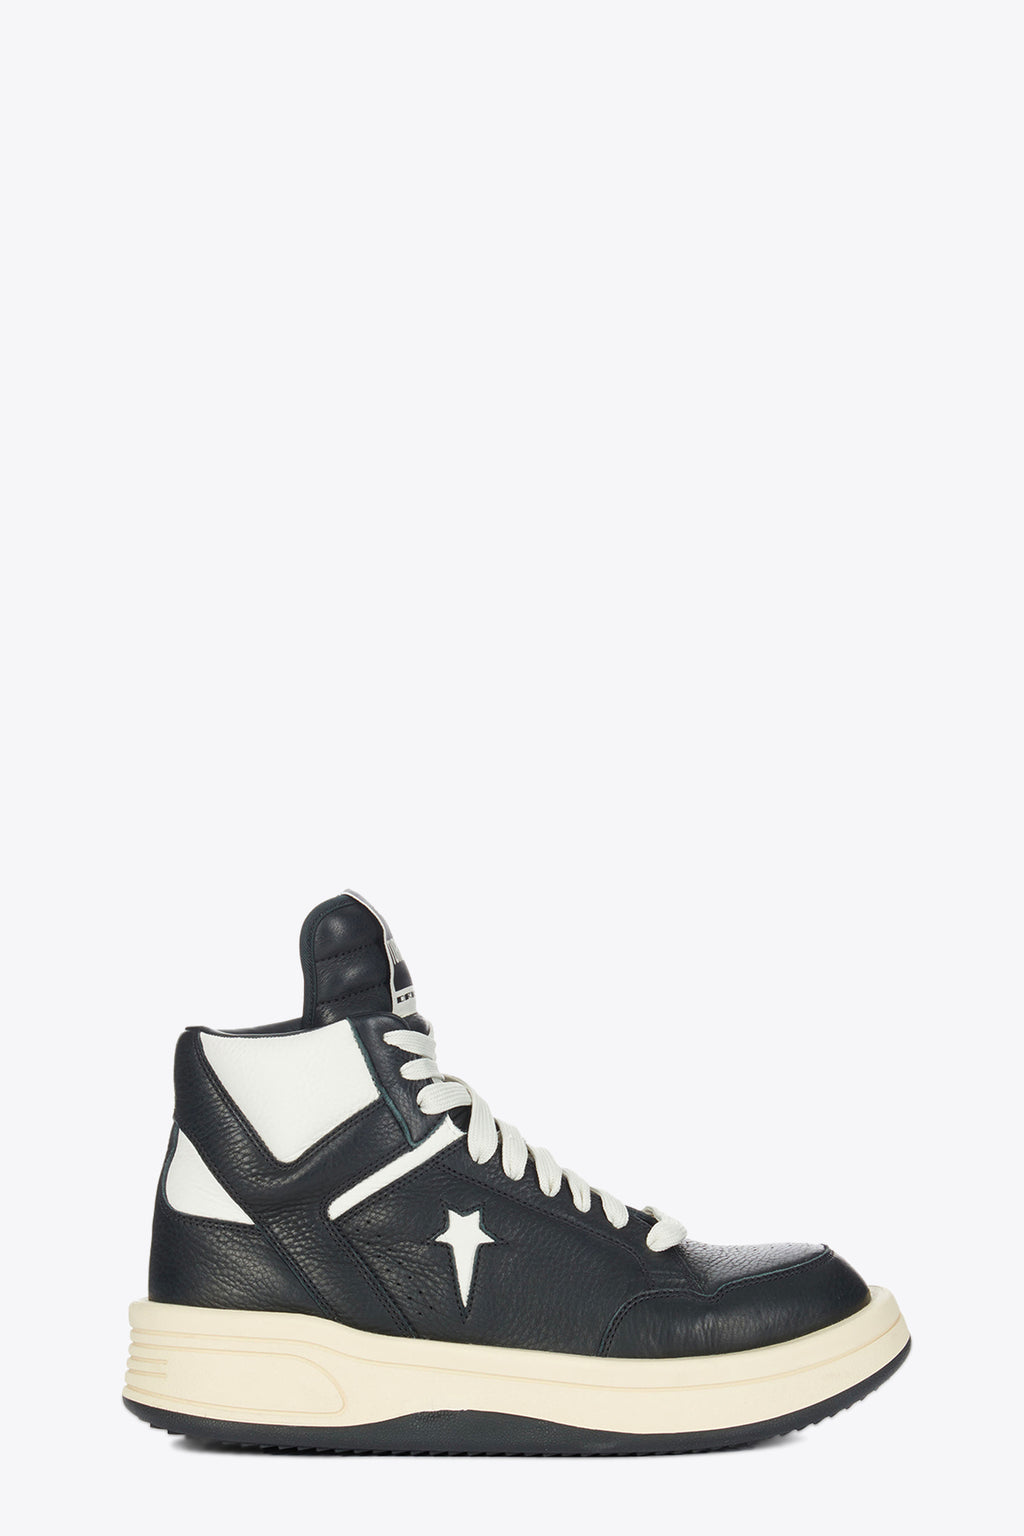 alt-image__Black-and-off-white-leather-basket-sneaker-Converse-collab---Turbowpn-